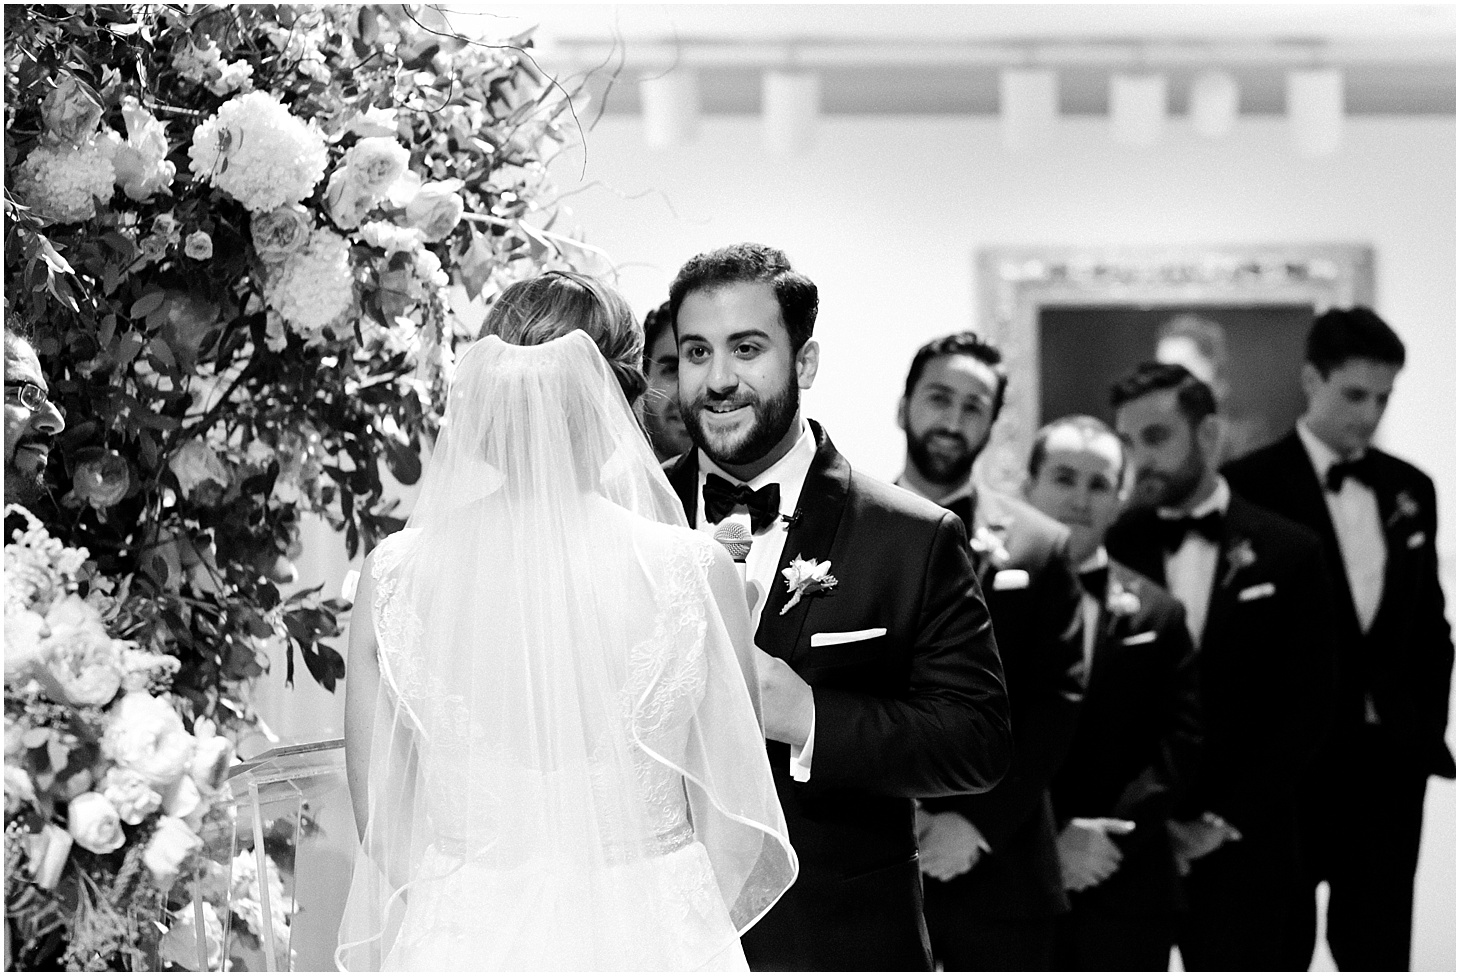 Interfaith Wedding Ceremony at the National Museum of Women in the Arts | DC Wedding by Sarah Bradshaw Photography